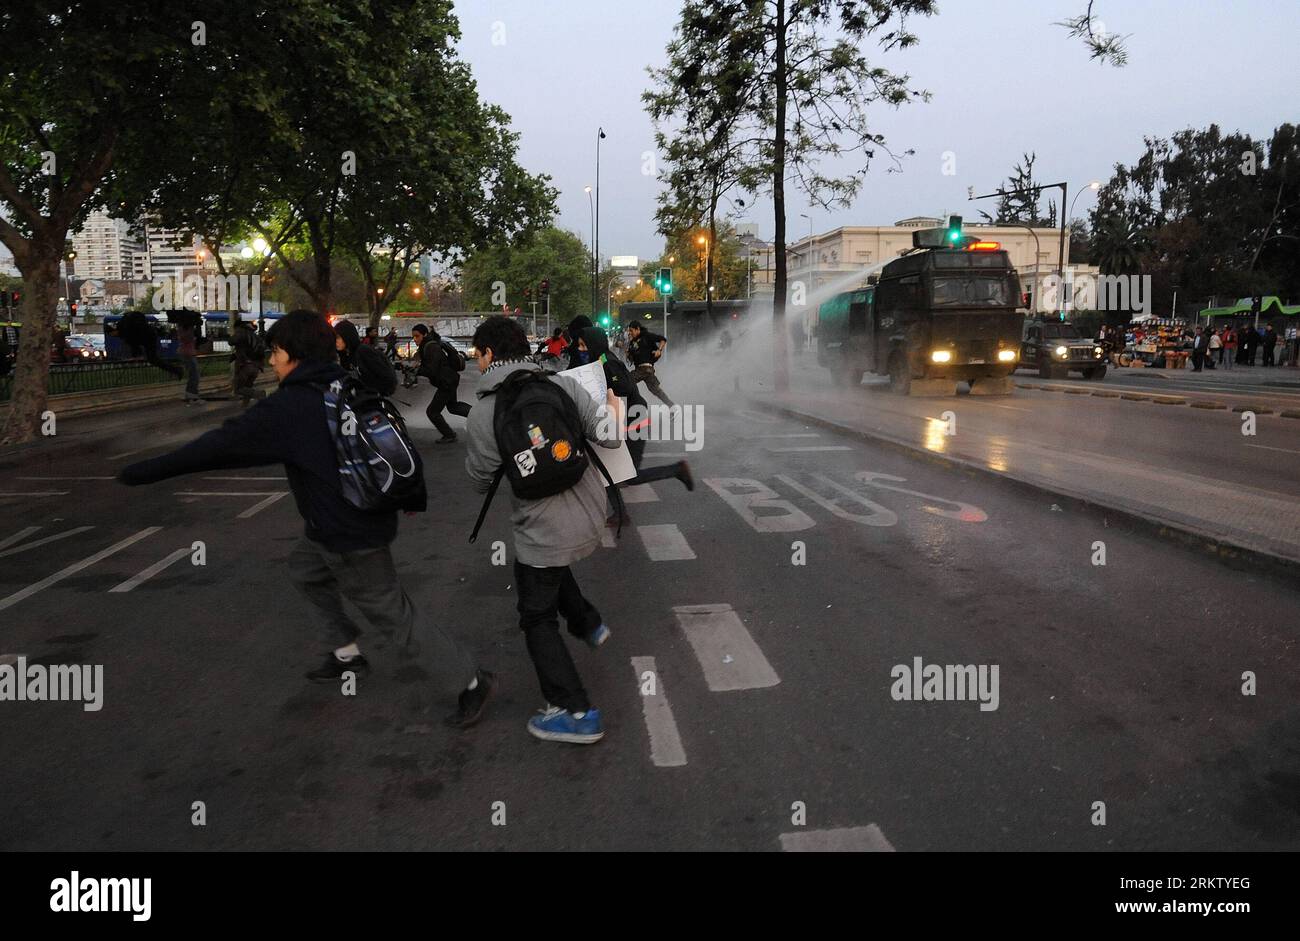 Bildnummer: 58571102  Datum: 09.10.2012  Copyright: imago/Xinhua (121010) -- SANTIAGO, Oct. 10, 2012 (Xinhua) -- A tanker squirts water to demonstrators during a protest against Hinzpeter Law , in Santiago, capital of Chile, on Oct. 9, 2012. According to local press, the social movements involved in the protests, said that the inititative seeks to criminalize social protest and the government has taken advantage of the circumstances to expedite its passage. (Xinhua/Jorge Villegas)(ctt) CHILE-SANTIAGO-PROTEST PUBLICATIONxNOTxINxCHN Politik Demo Protest Ausschreitungen Strassenschlacht xjh x0x p Stock Photo